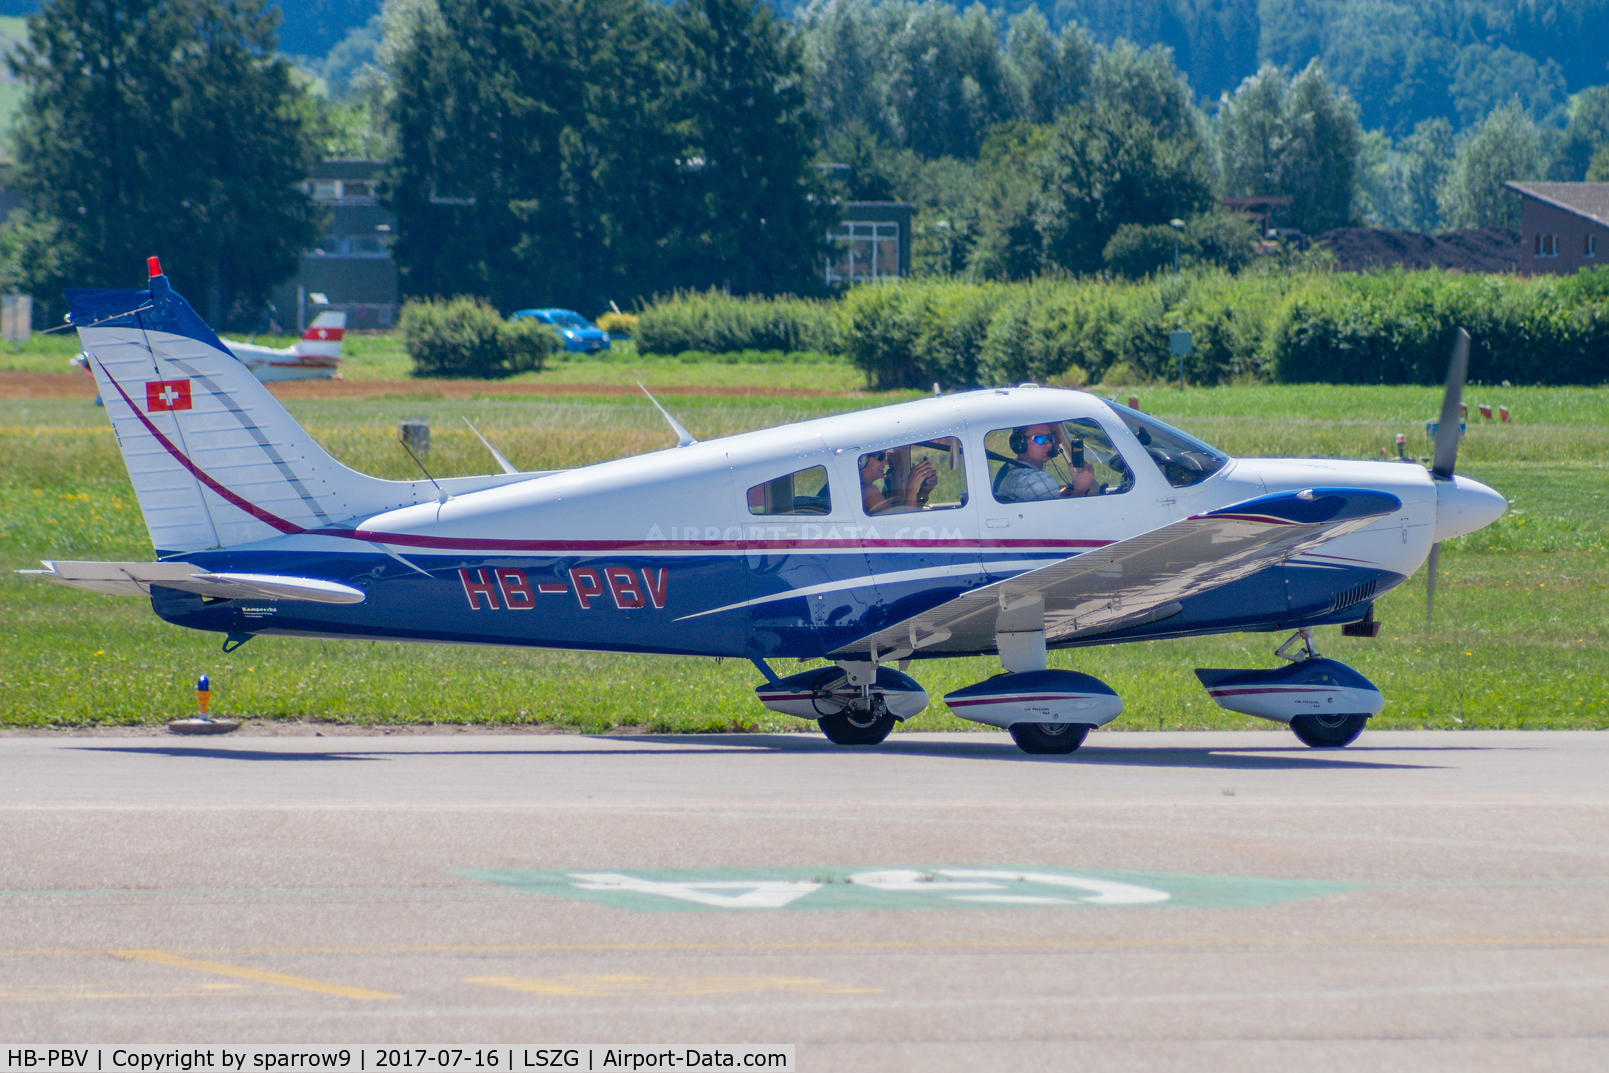 HB-PBV, 1977 Piper PA-28-181 Archer II C/N 28-779056, At Grenchen. HB-registered since 1977-08-16